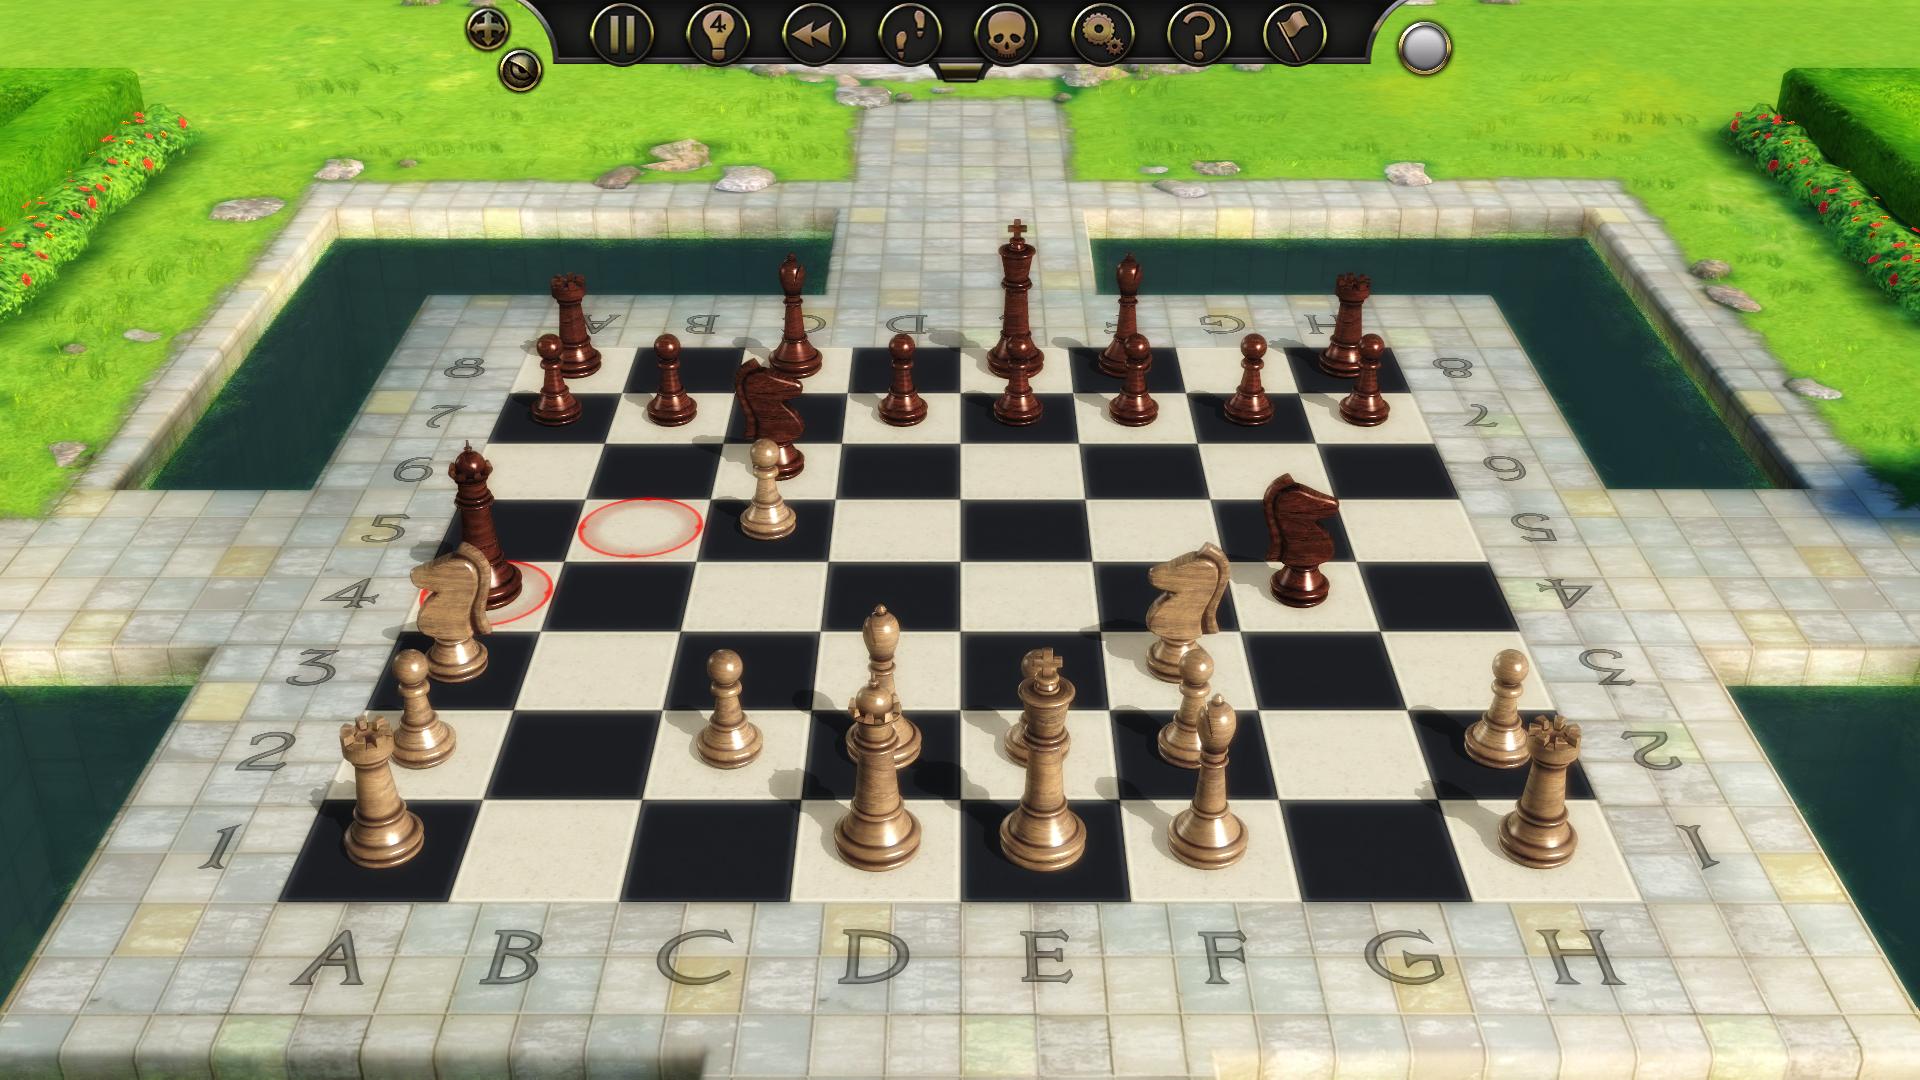 battle chess game of kings download full free